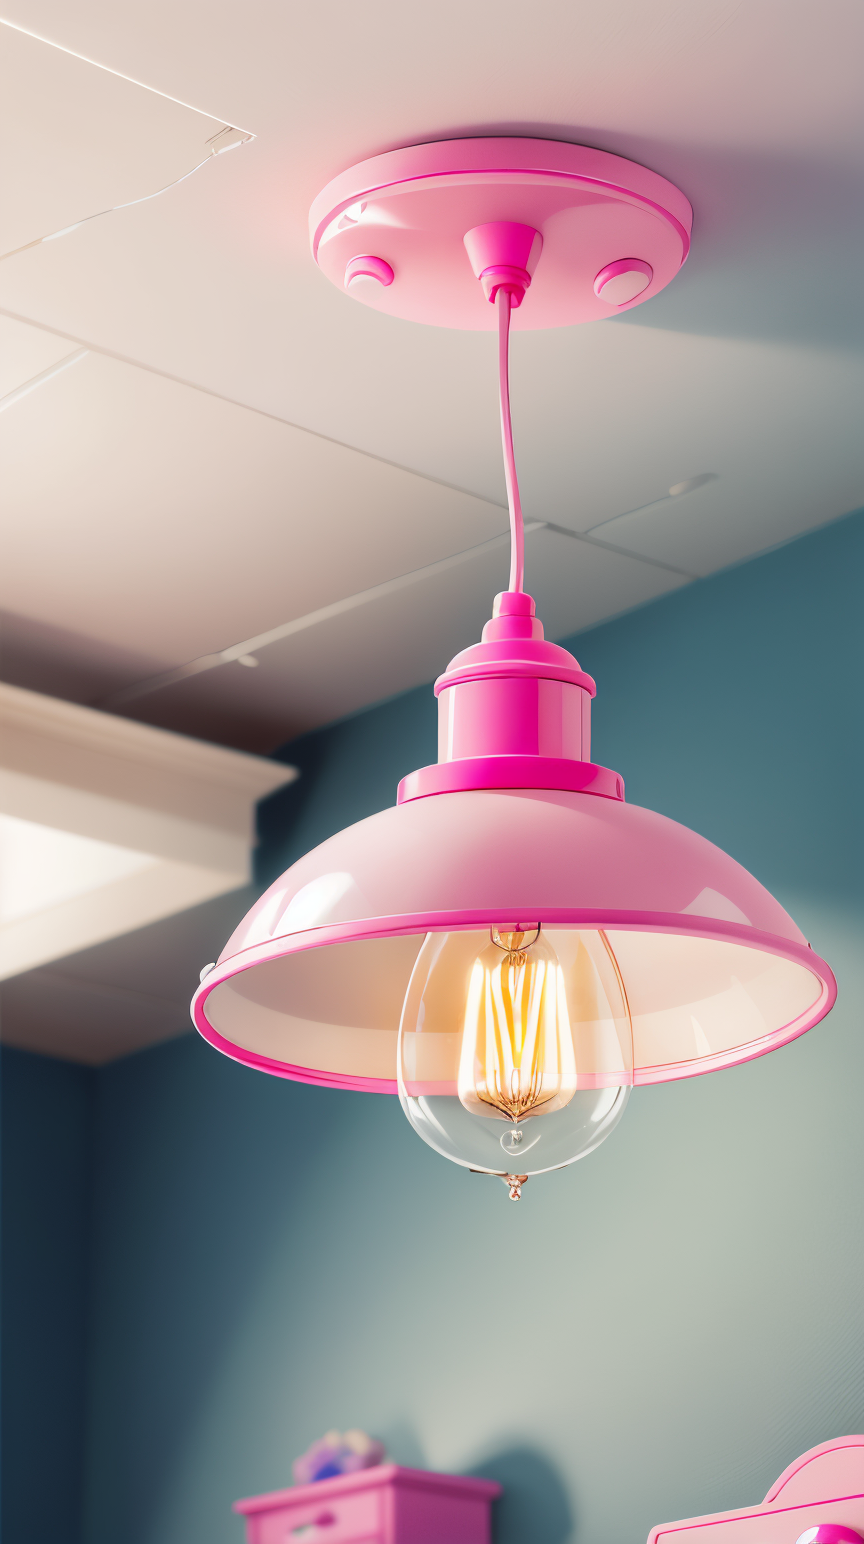 <lora:BarbieCore:0.8> BarbieCore ceiling lamp, (shiny plastic:0.8), (pink and white:0.9), (pastel:0.85)